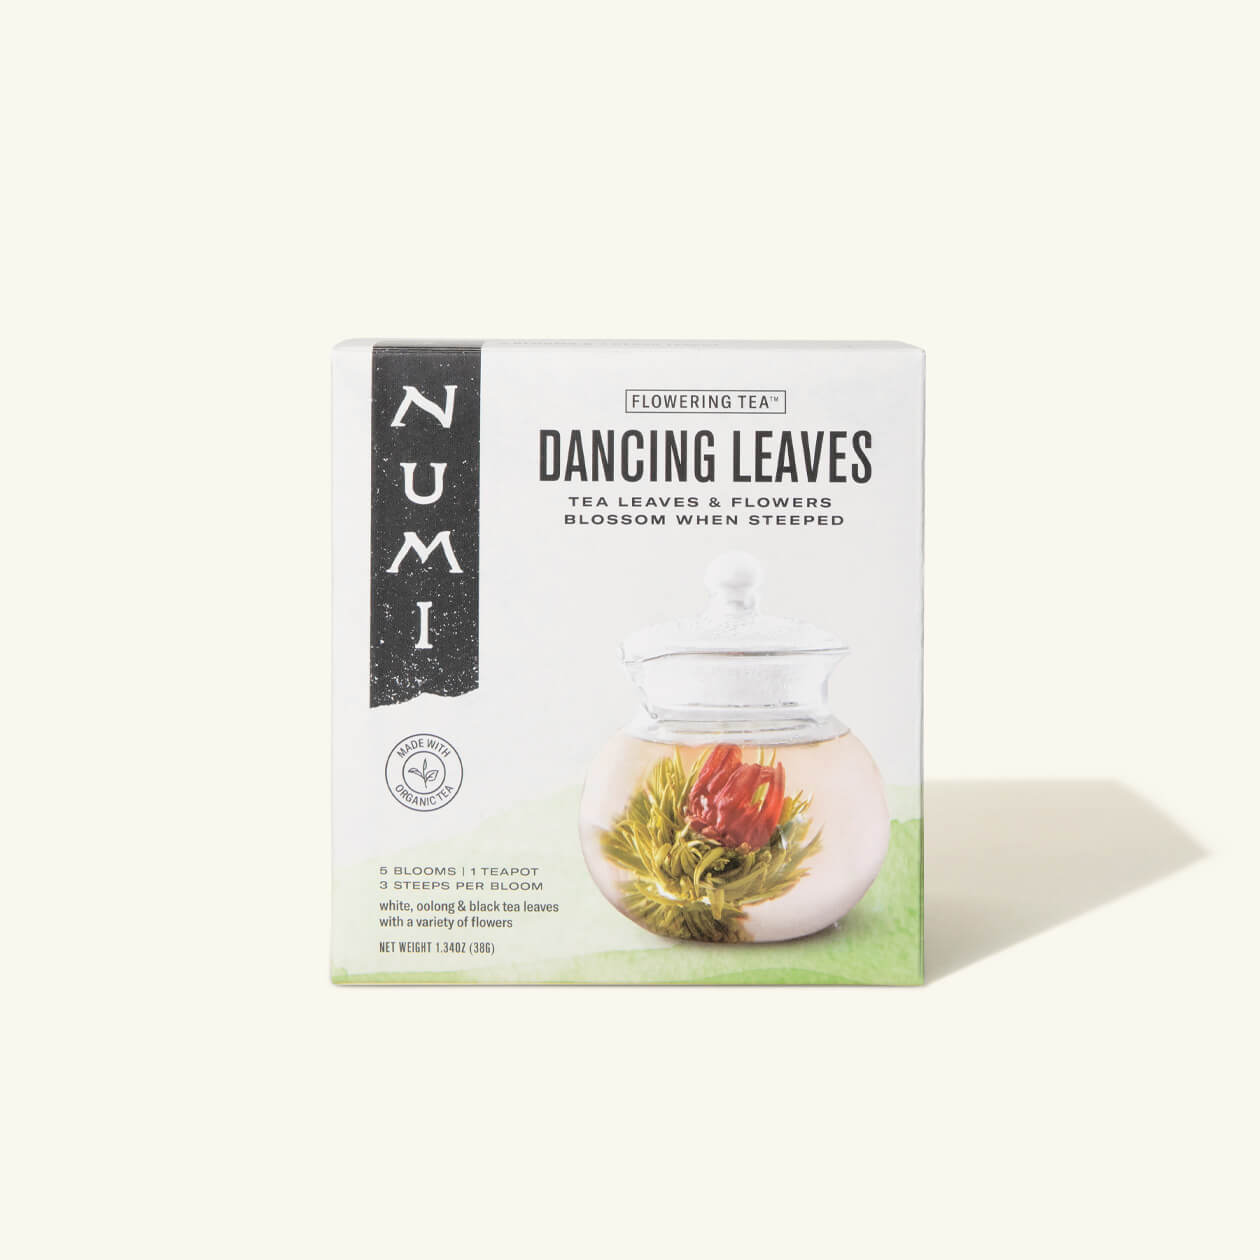 A box of Numi's Dancing Leaves Flowering Tea box on a cream background